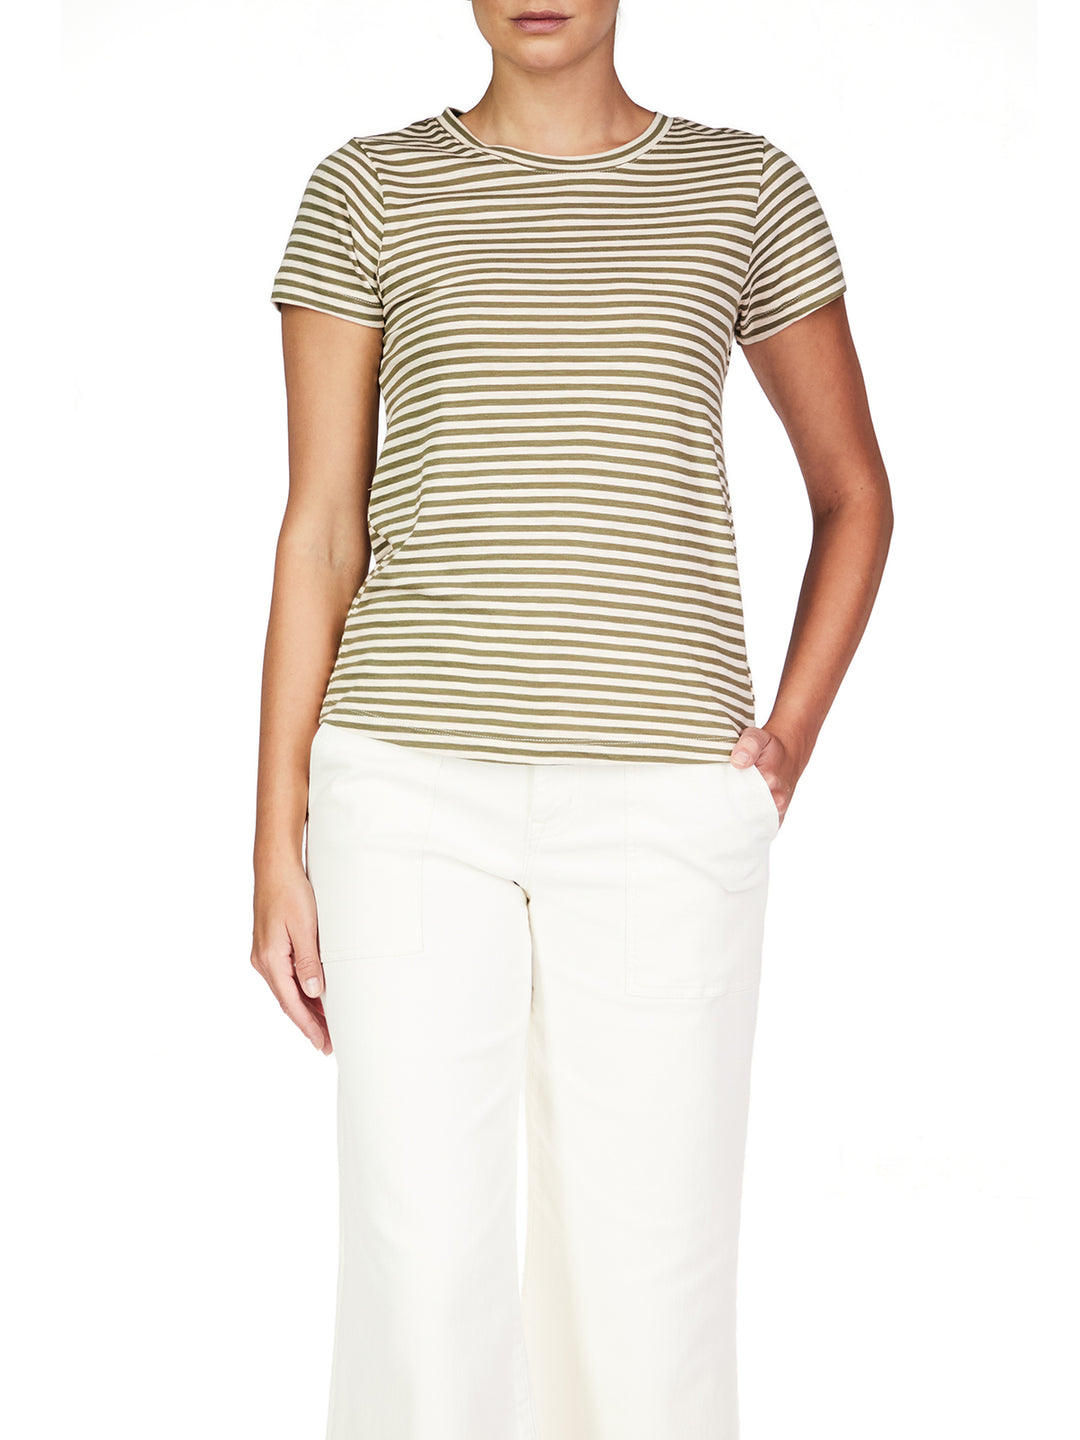 The Perfect Tee, Gentle Spots